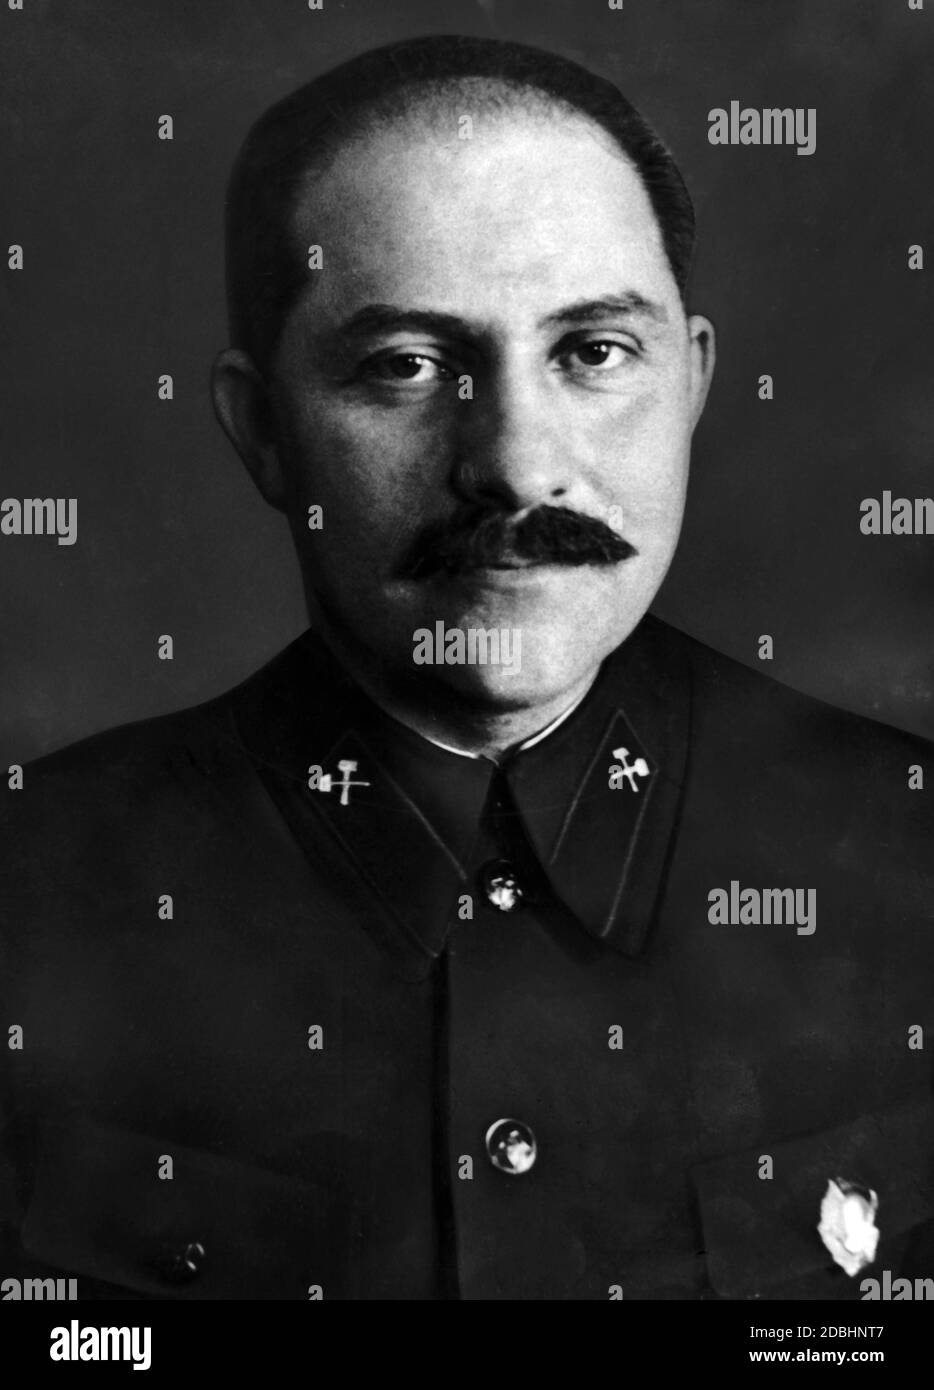 Lazar Kaganovich, for many years a member of the Politburo of the CPSU in various functions and a confidant of Stalin. Stock Photo